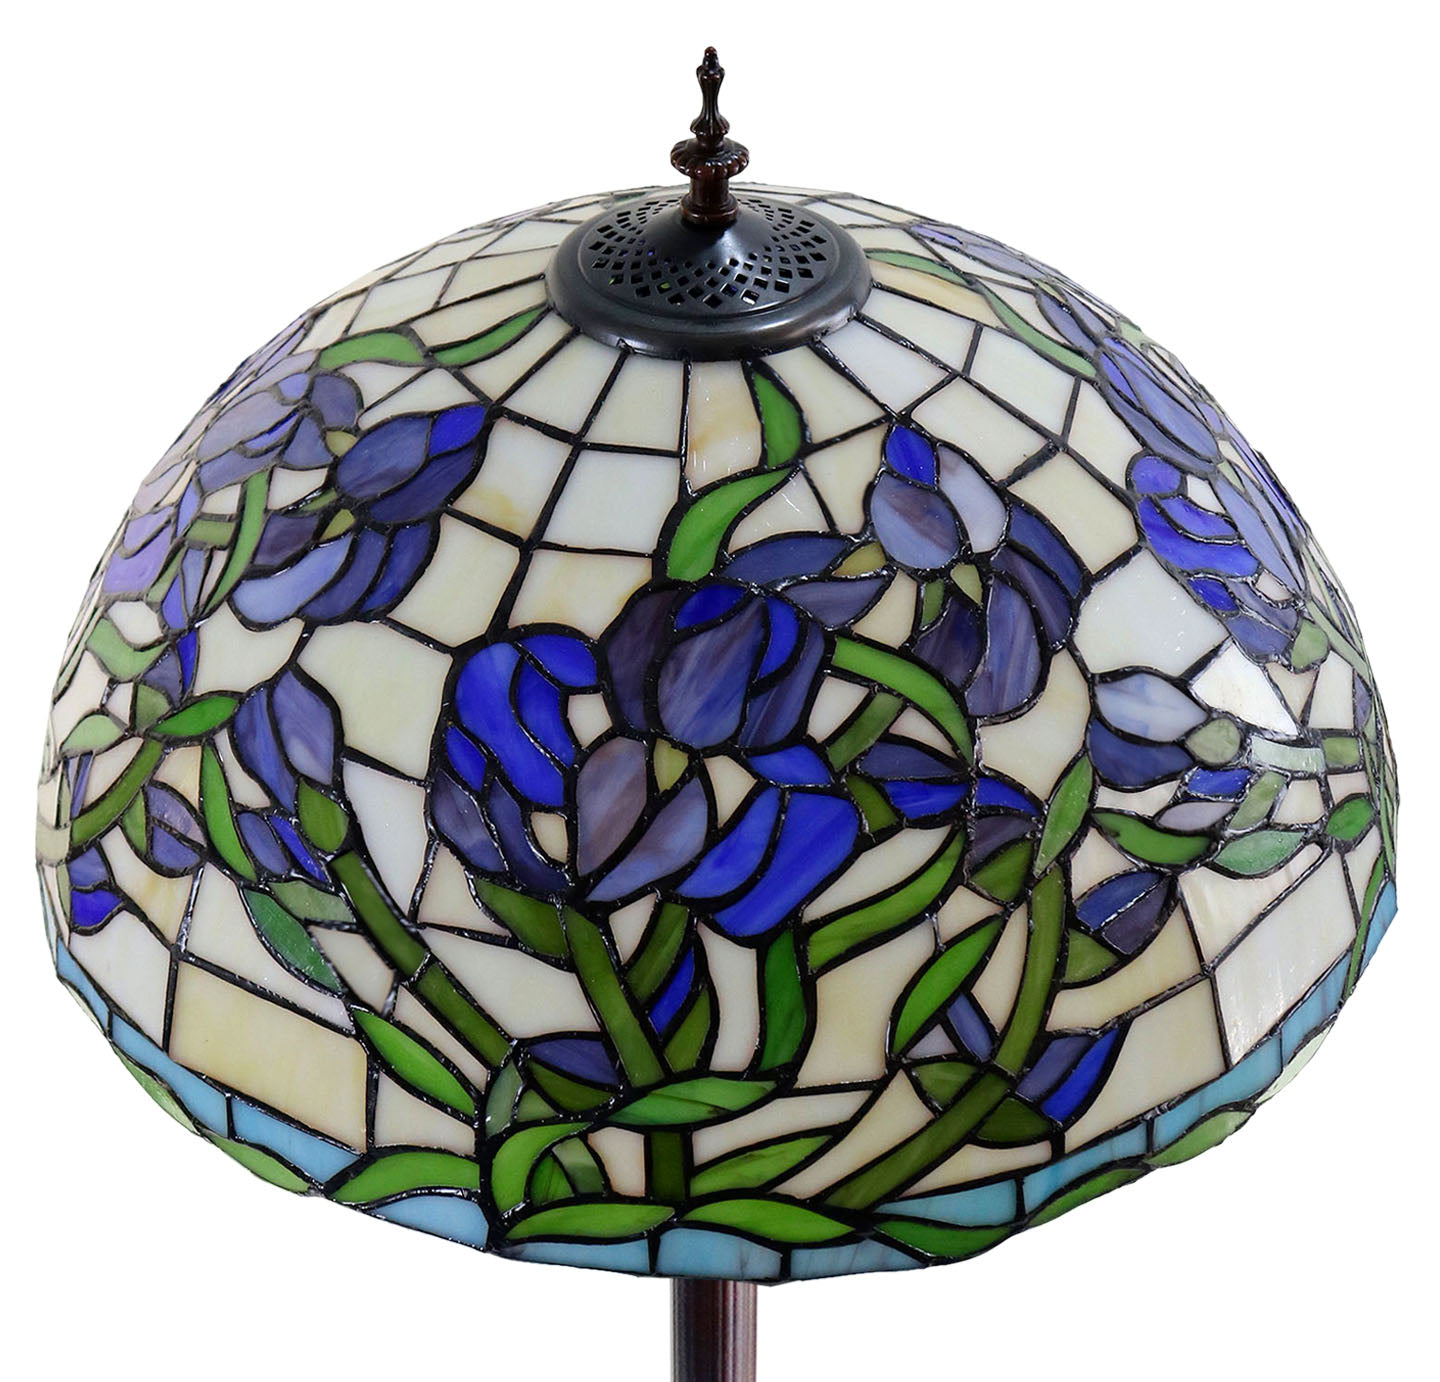 18" Blue Sweet pea blossoms Stained Glass Tiffany Floor Lamp